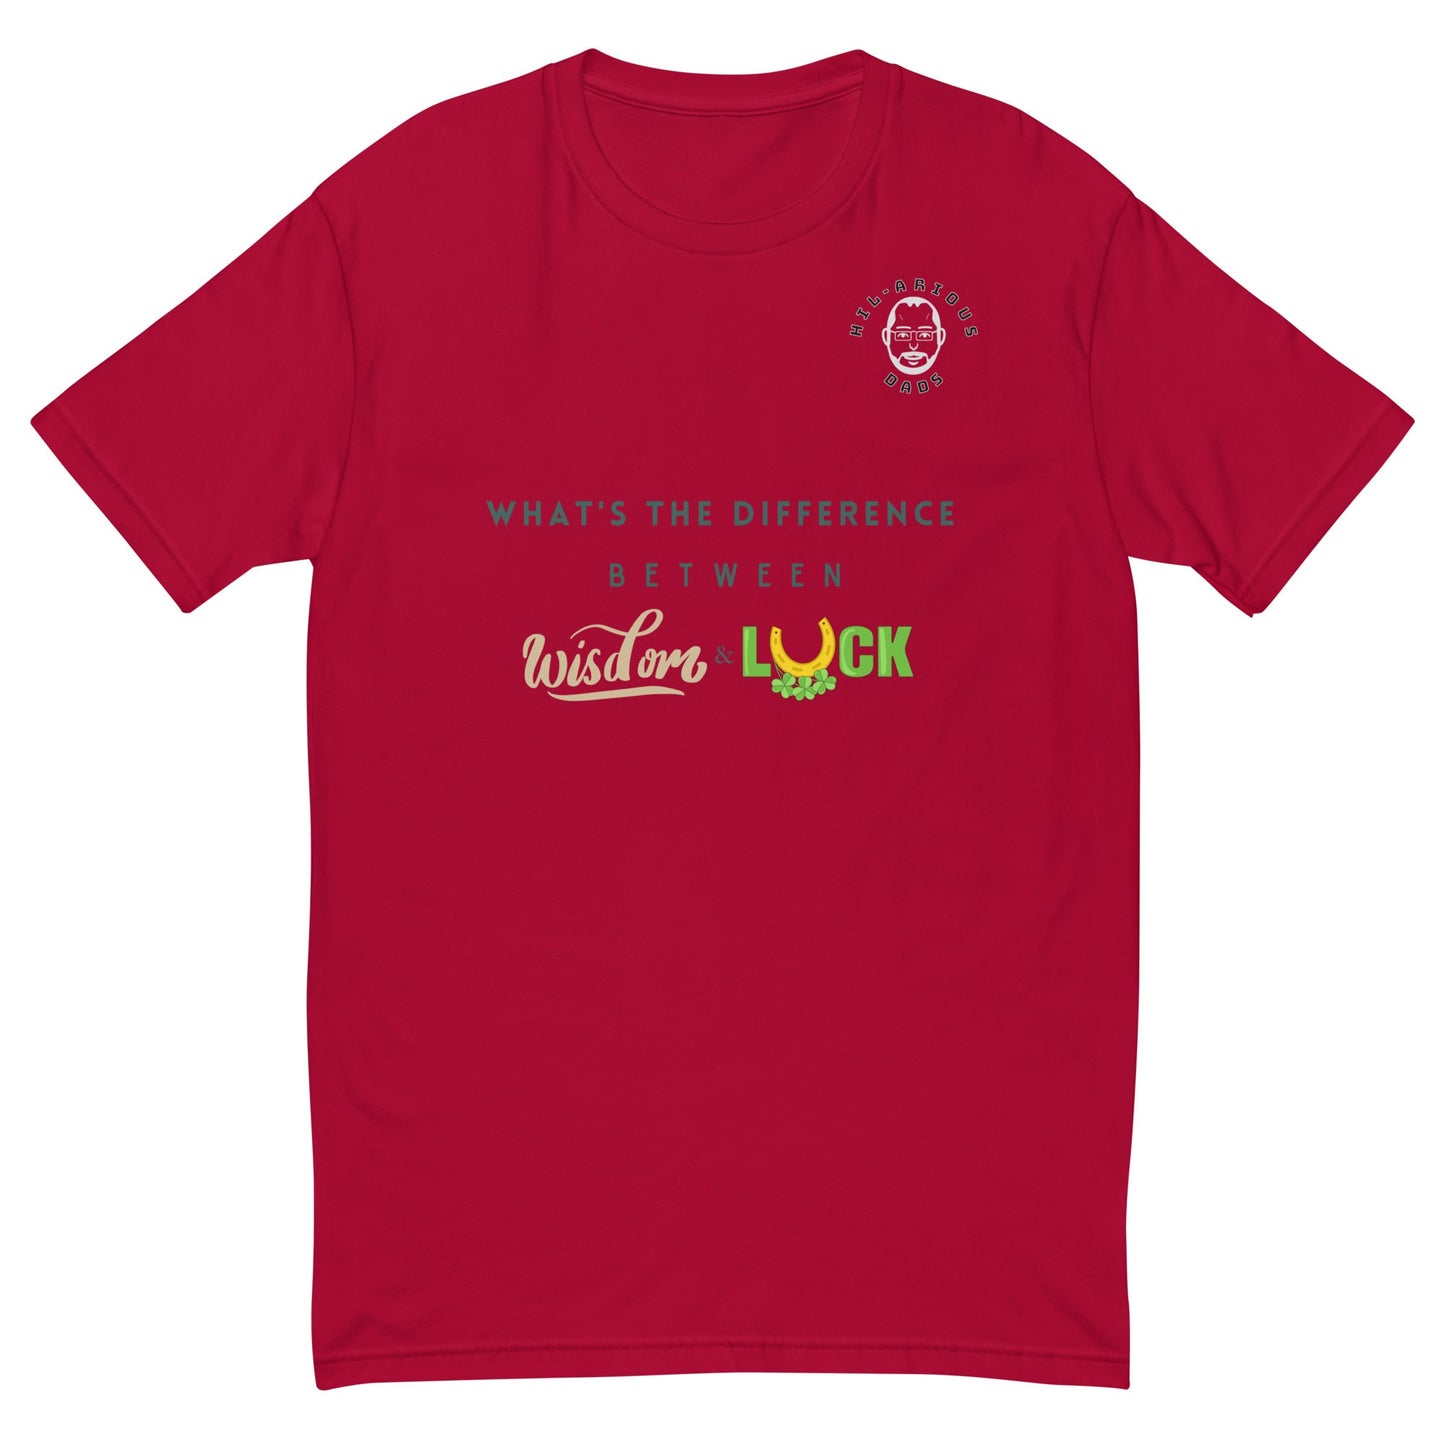 What's the difference between wisdom and luck?-T-shirt - Hil-arious Dads